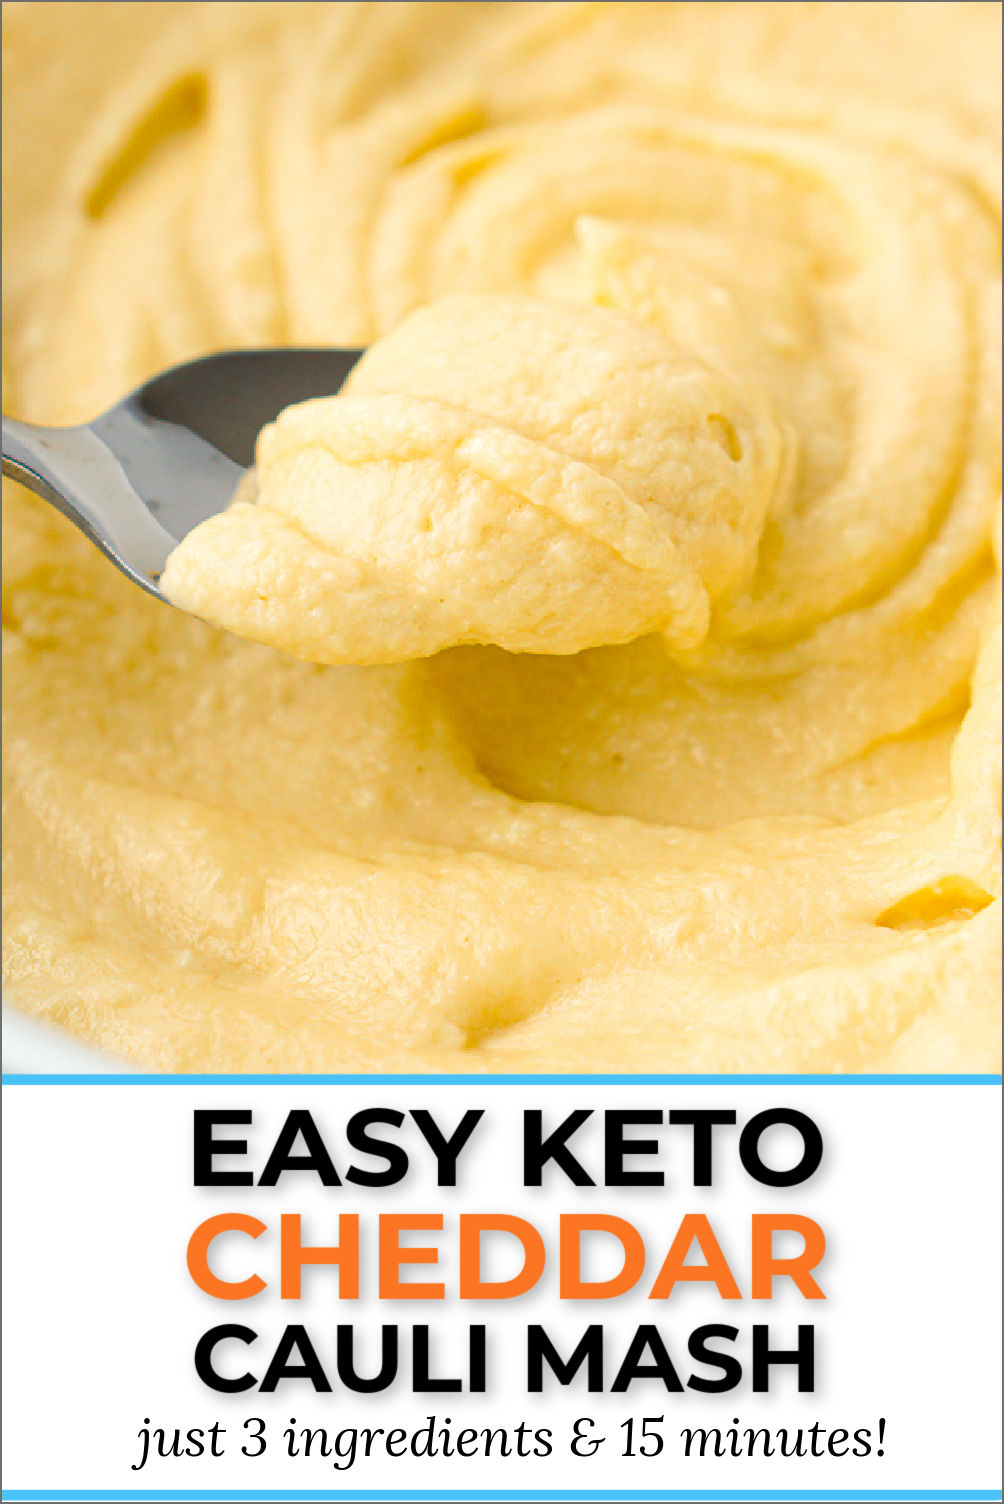 closeup of a spoonful of keto cheddar mashed cauliflower with text